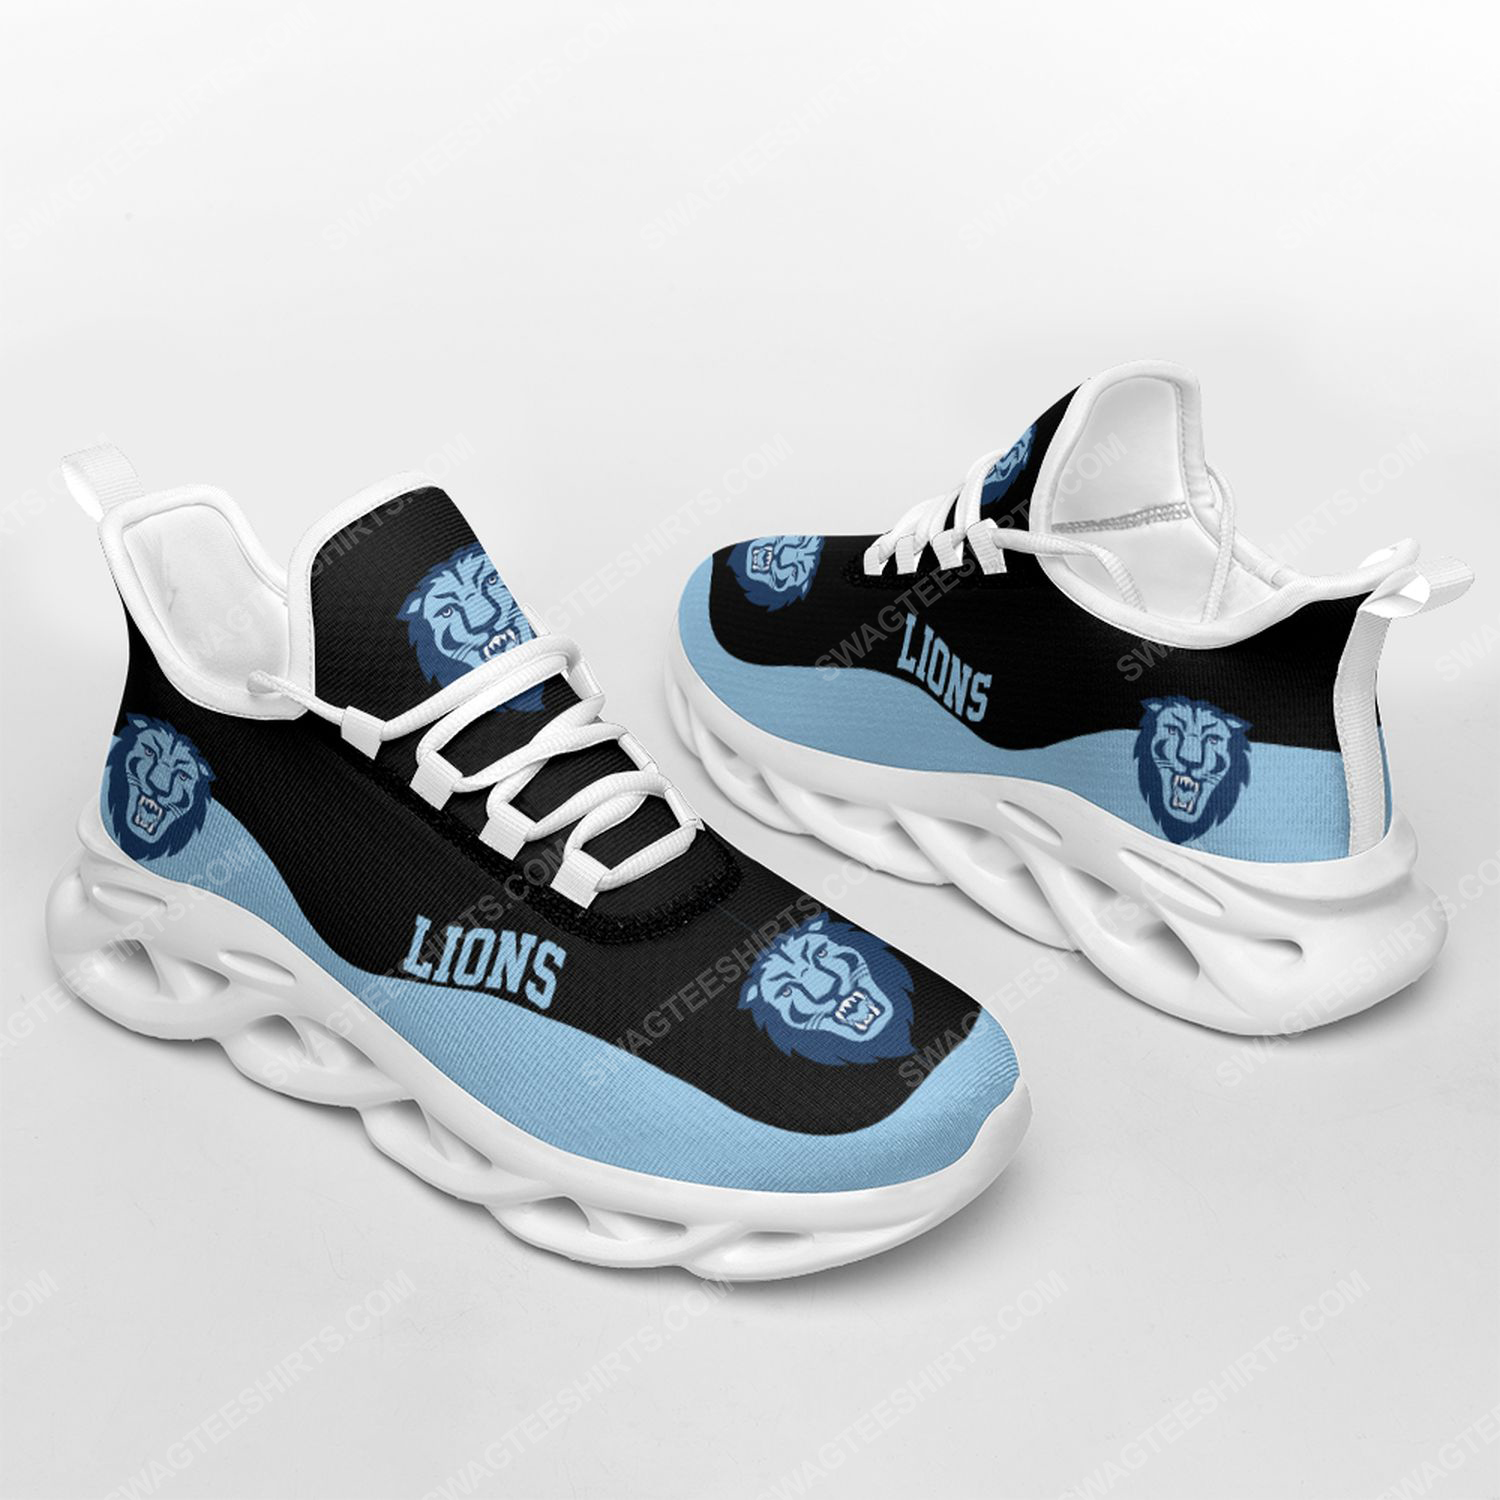 The columbia lions football team max soul shoes 2